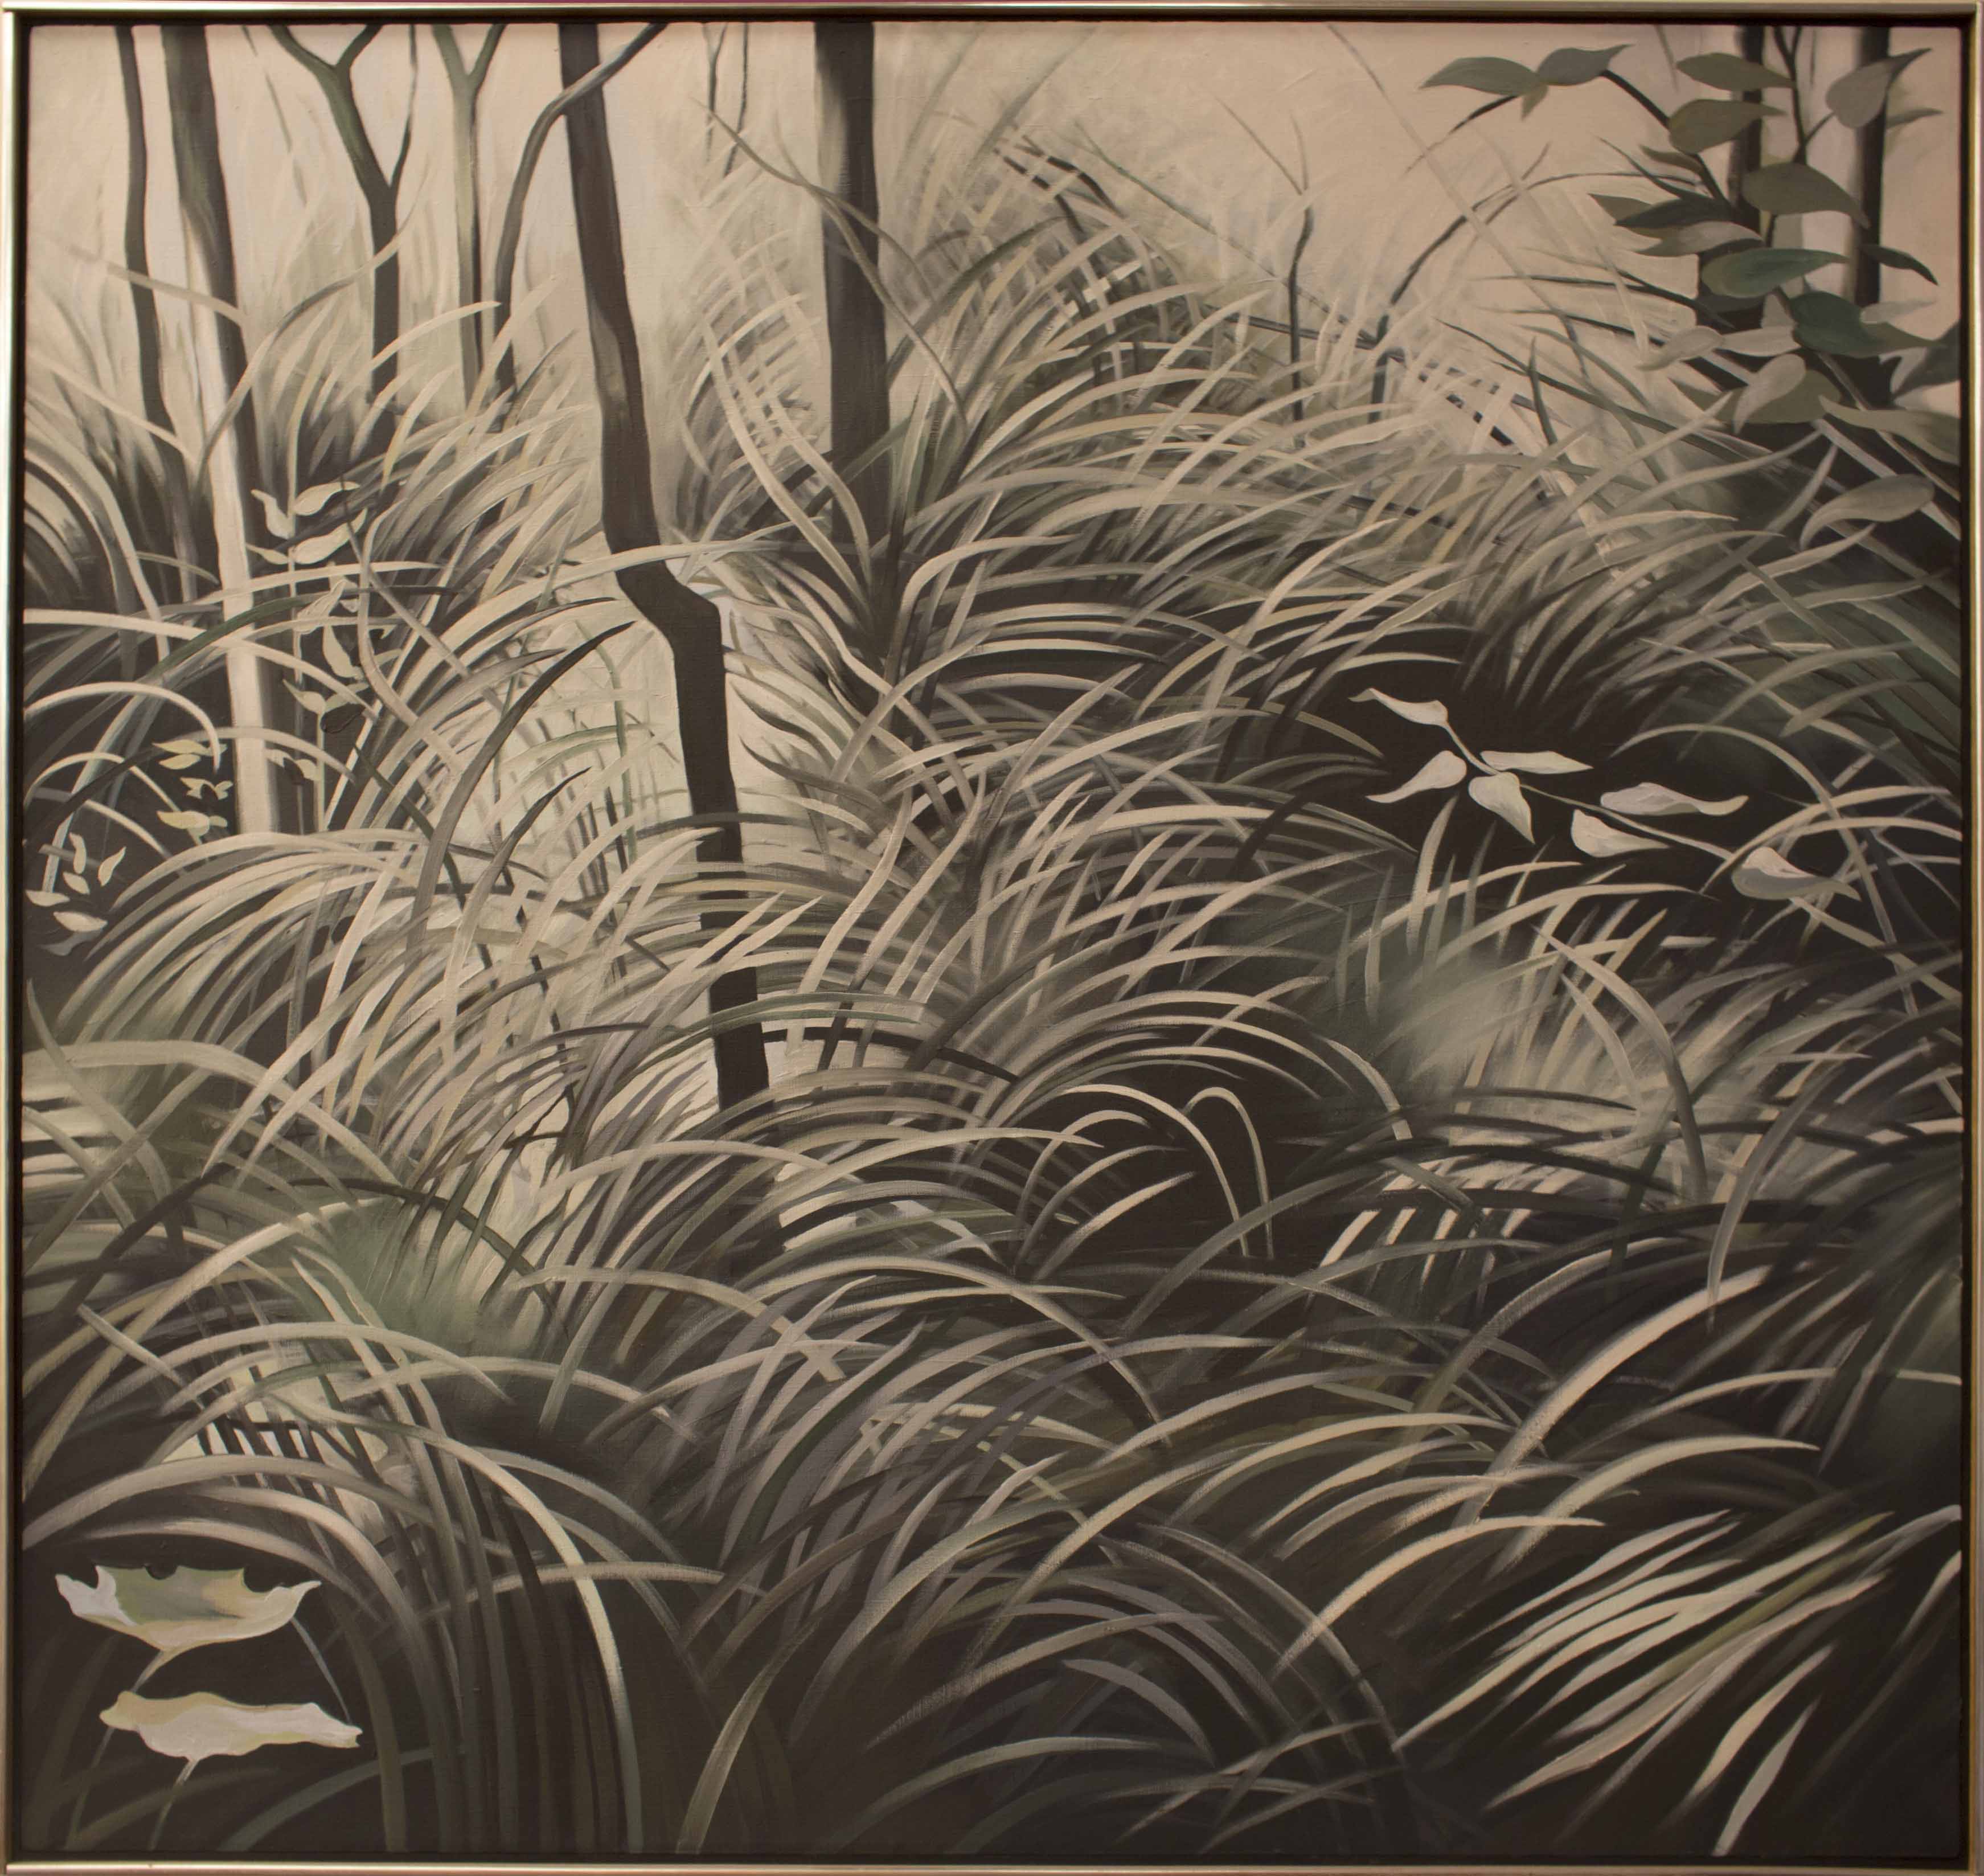 "Grasses" is an oil painting of grasses and trees. It is painted with varying shades of greens, browns, and neutrals. 